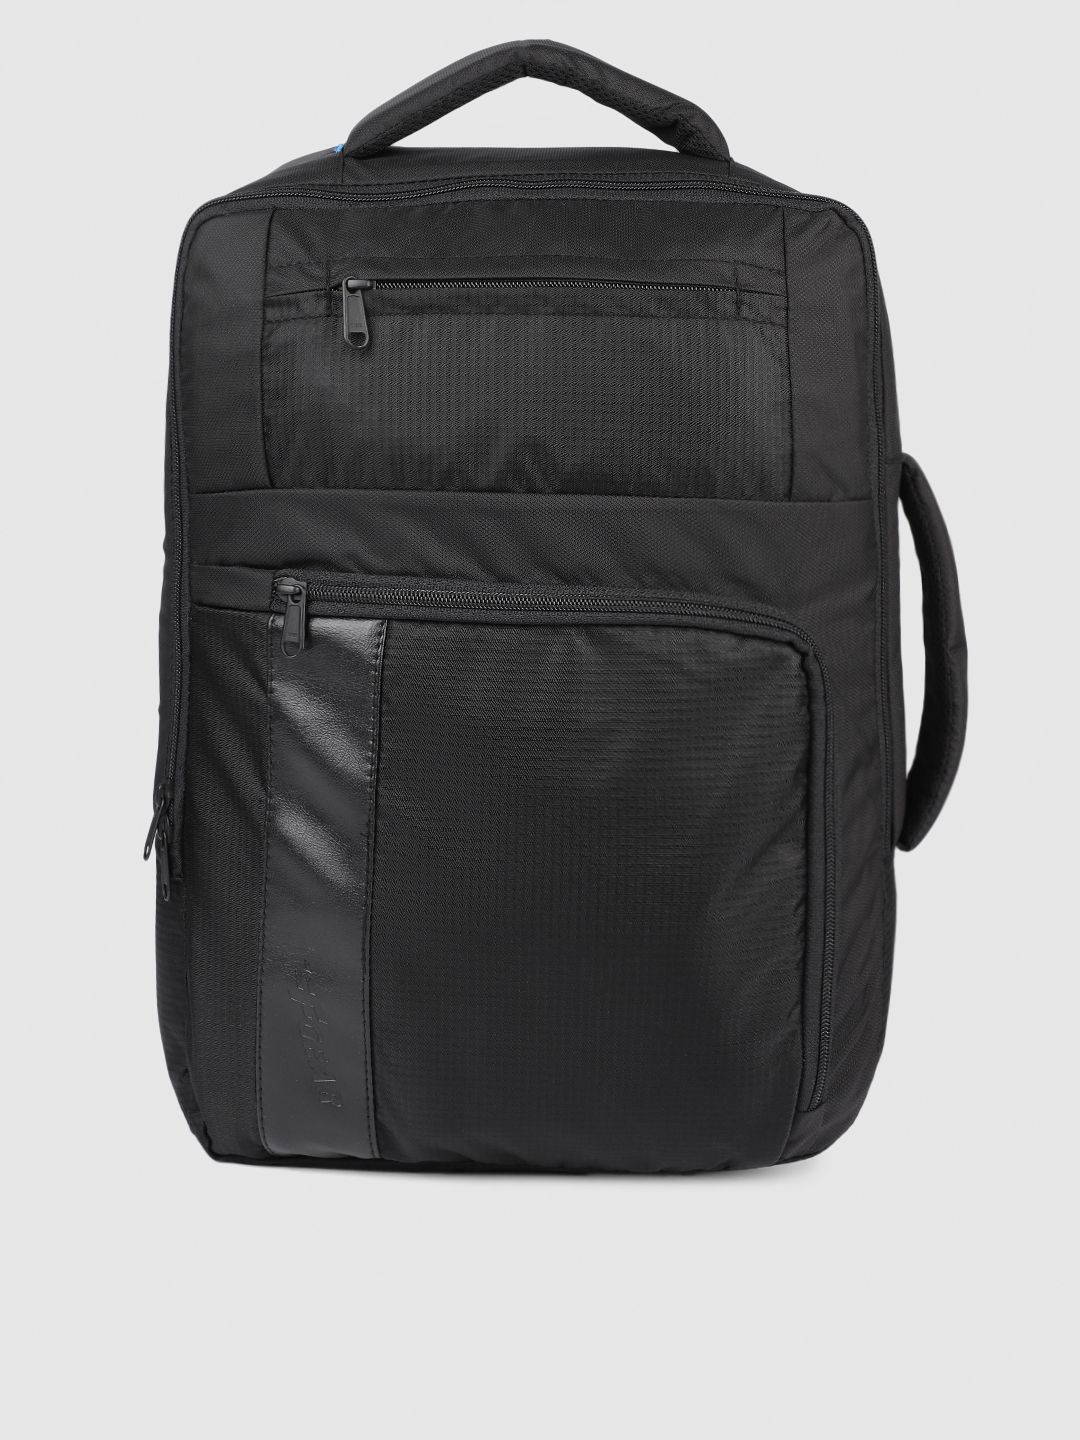 F Gear Unisex Black Solid Spartan Backpack Price in India